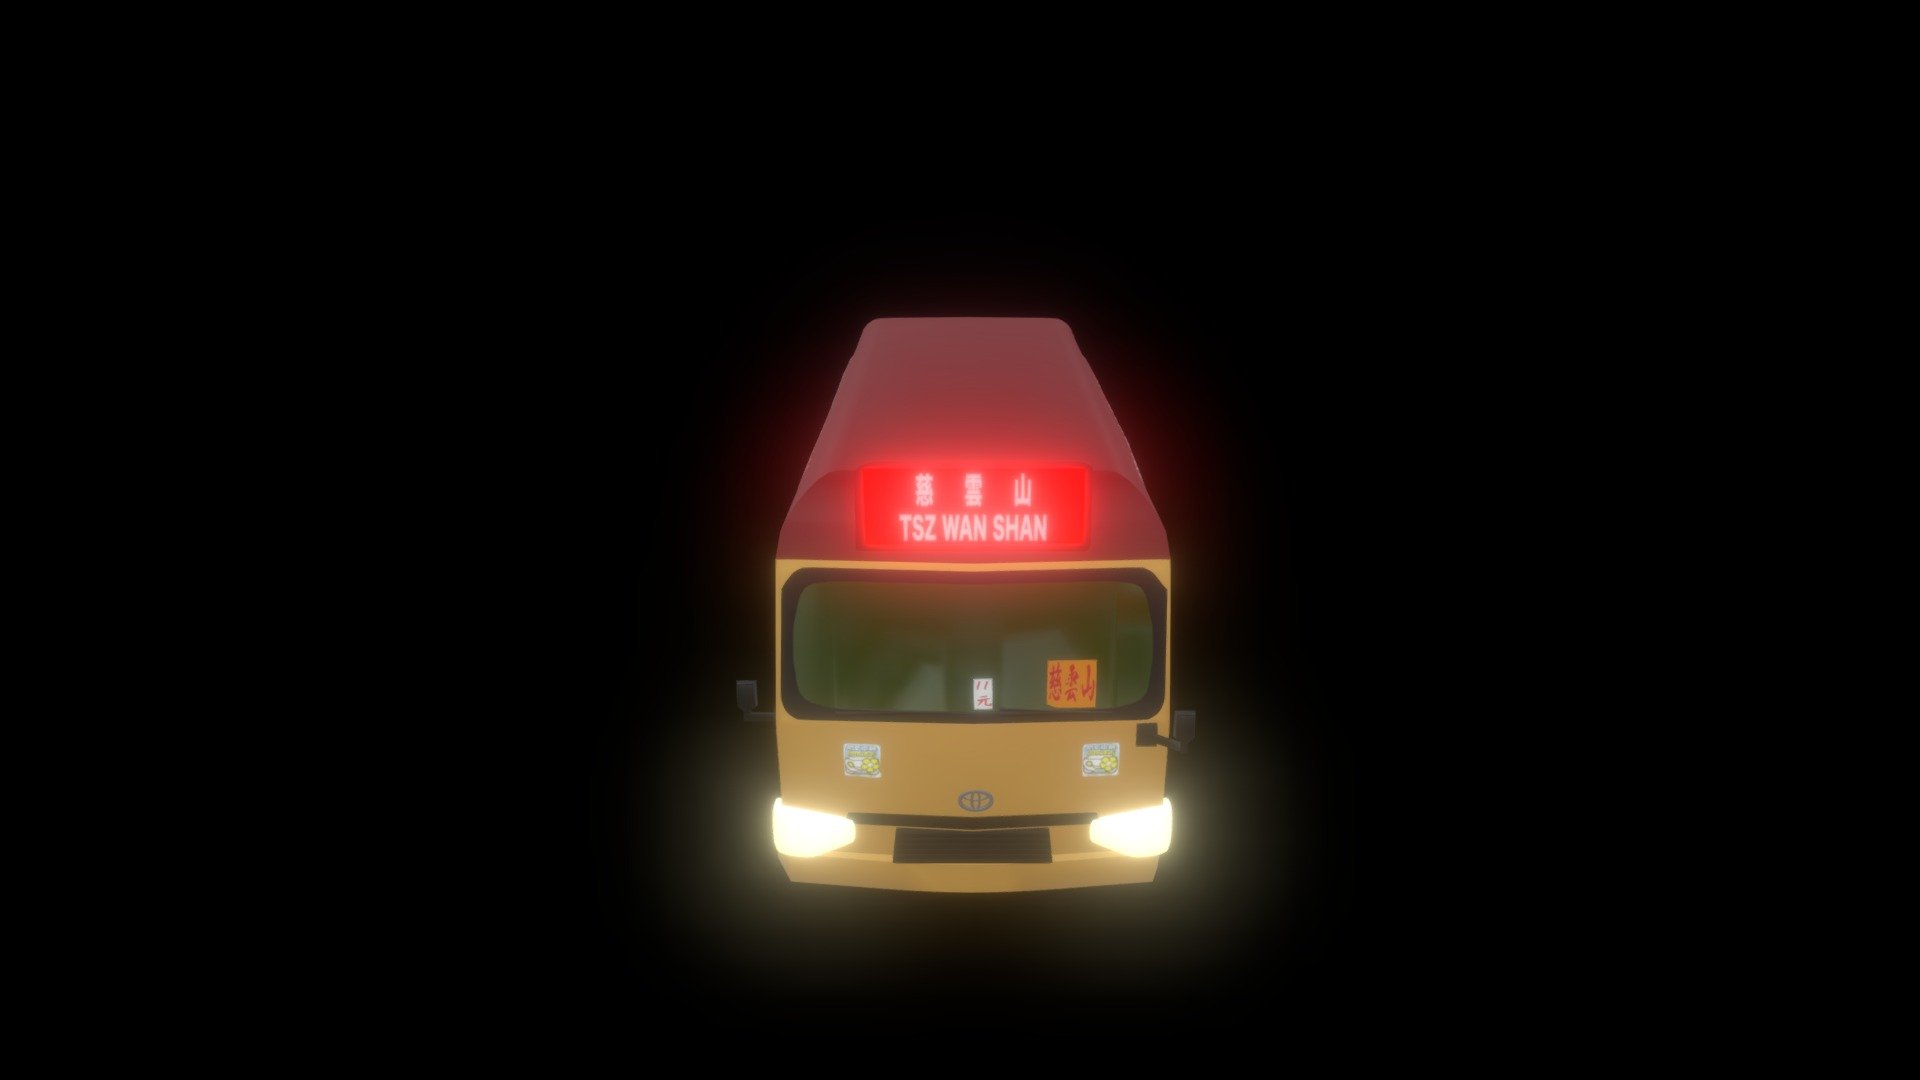 Hi This is chris.I developed the moblie game “Fighting Homeward Bound” This is Hong Kong Transportation &ldquo;Mini Bus